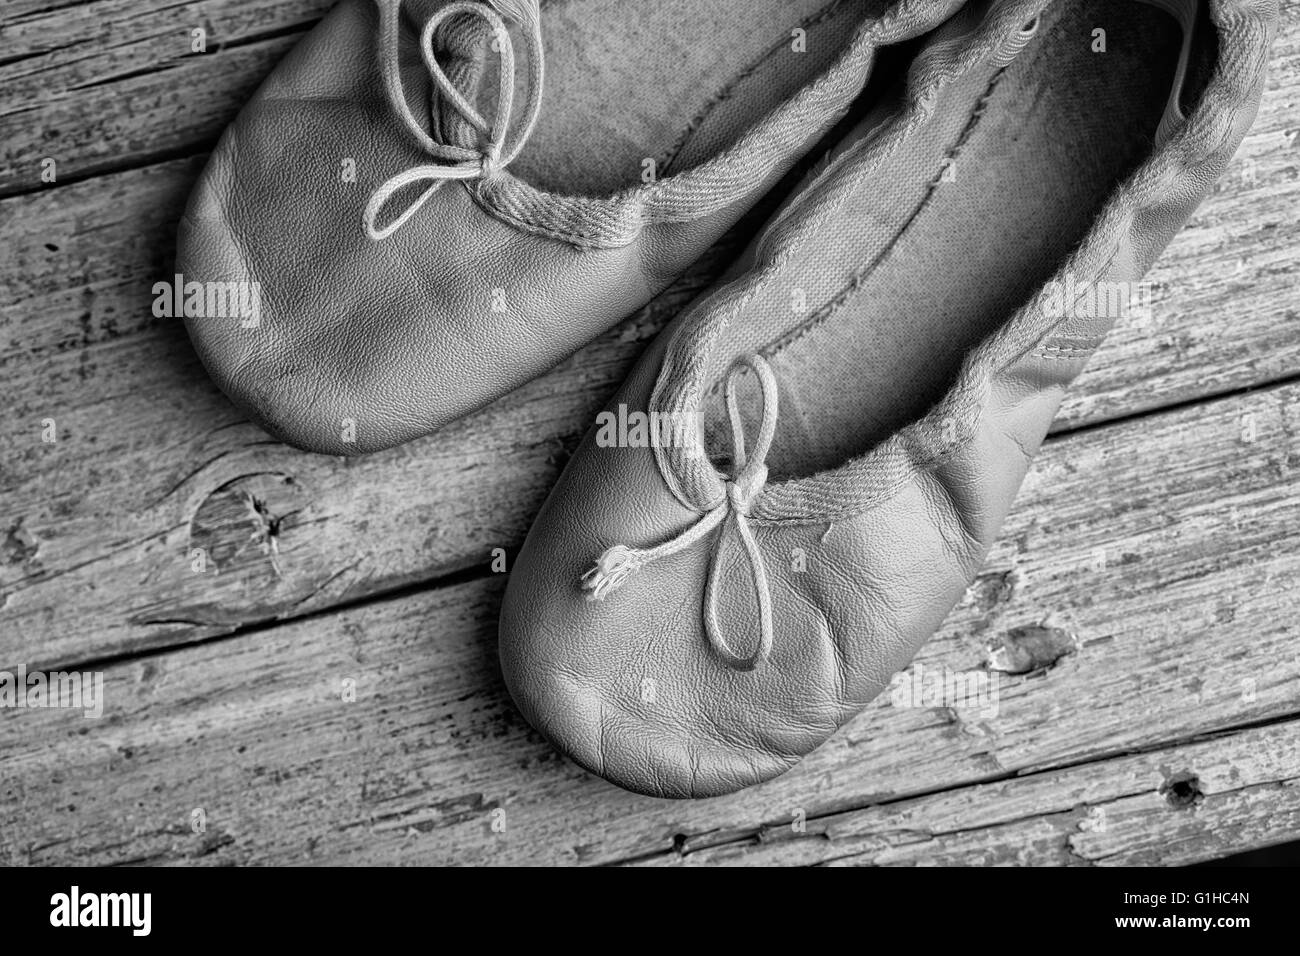 Worn Ballet Shoes on black and white Stock Photo - Alamy